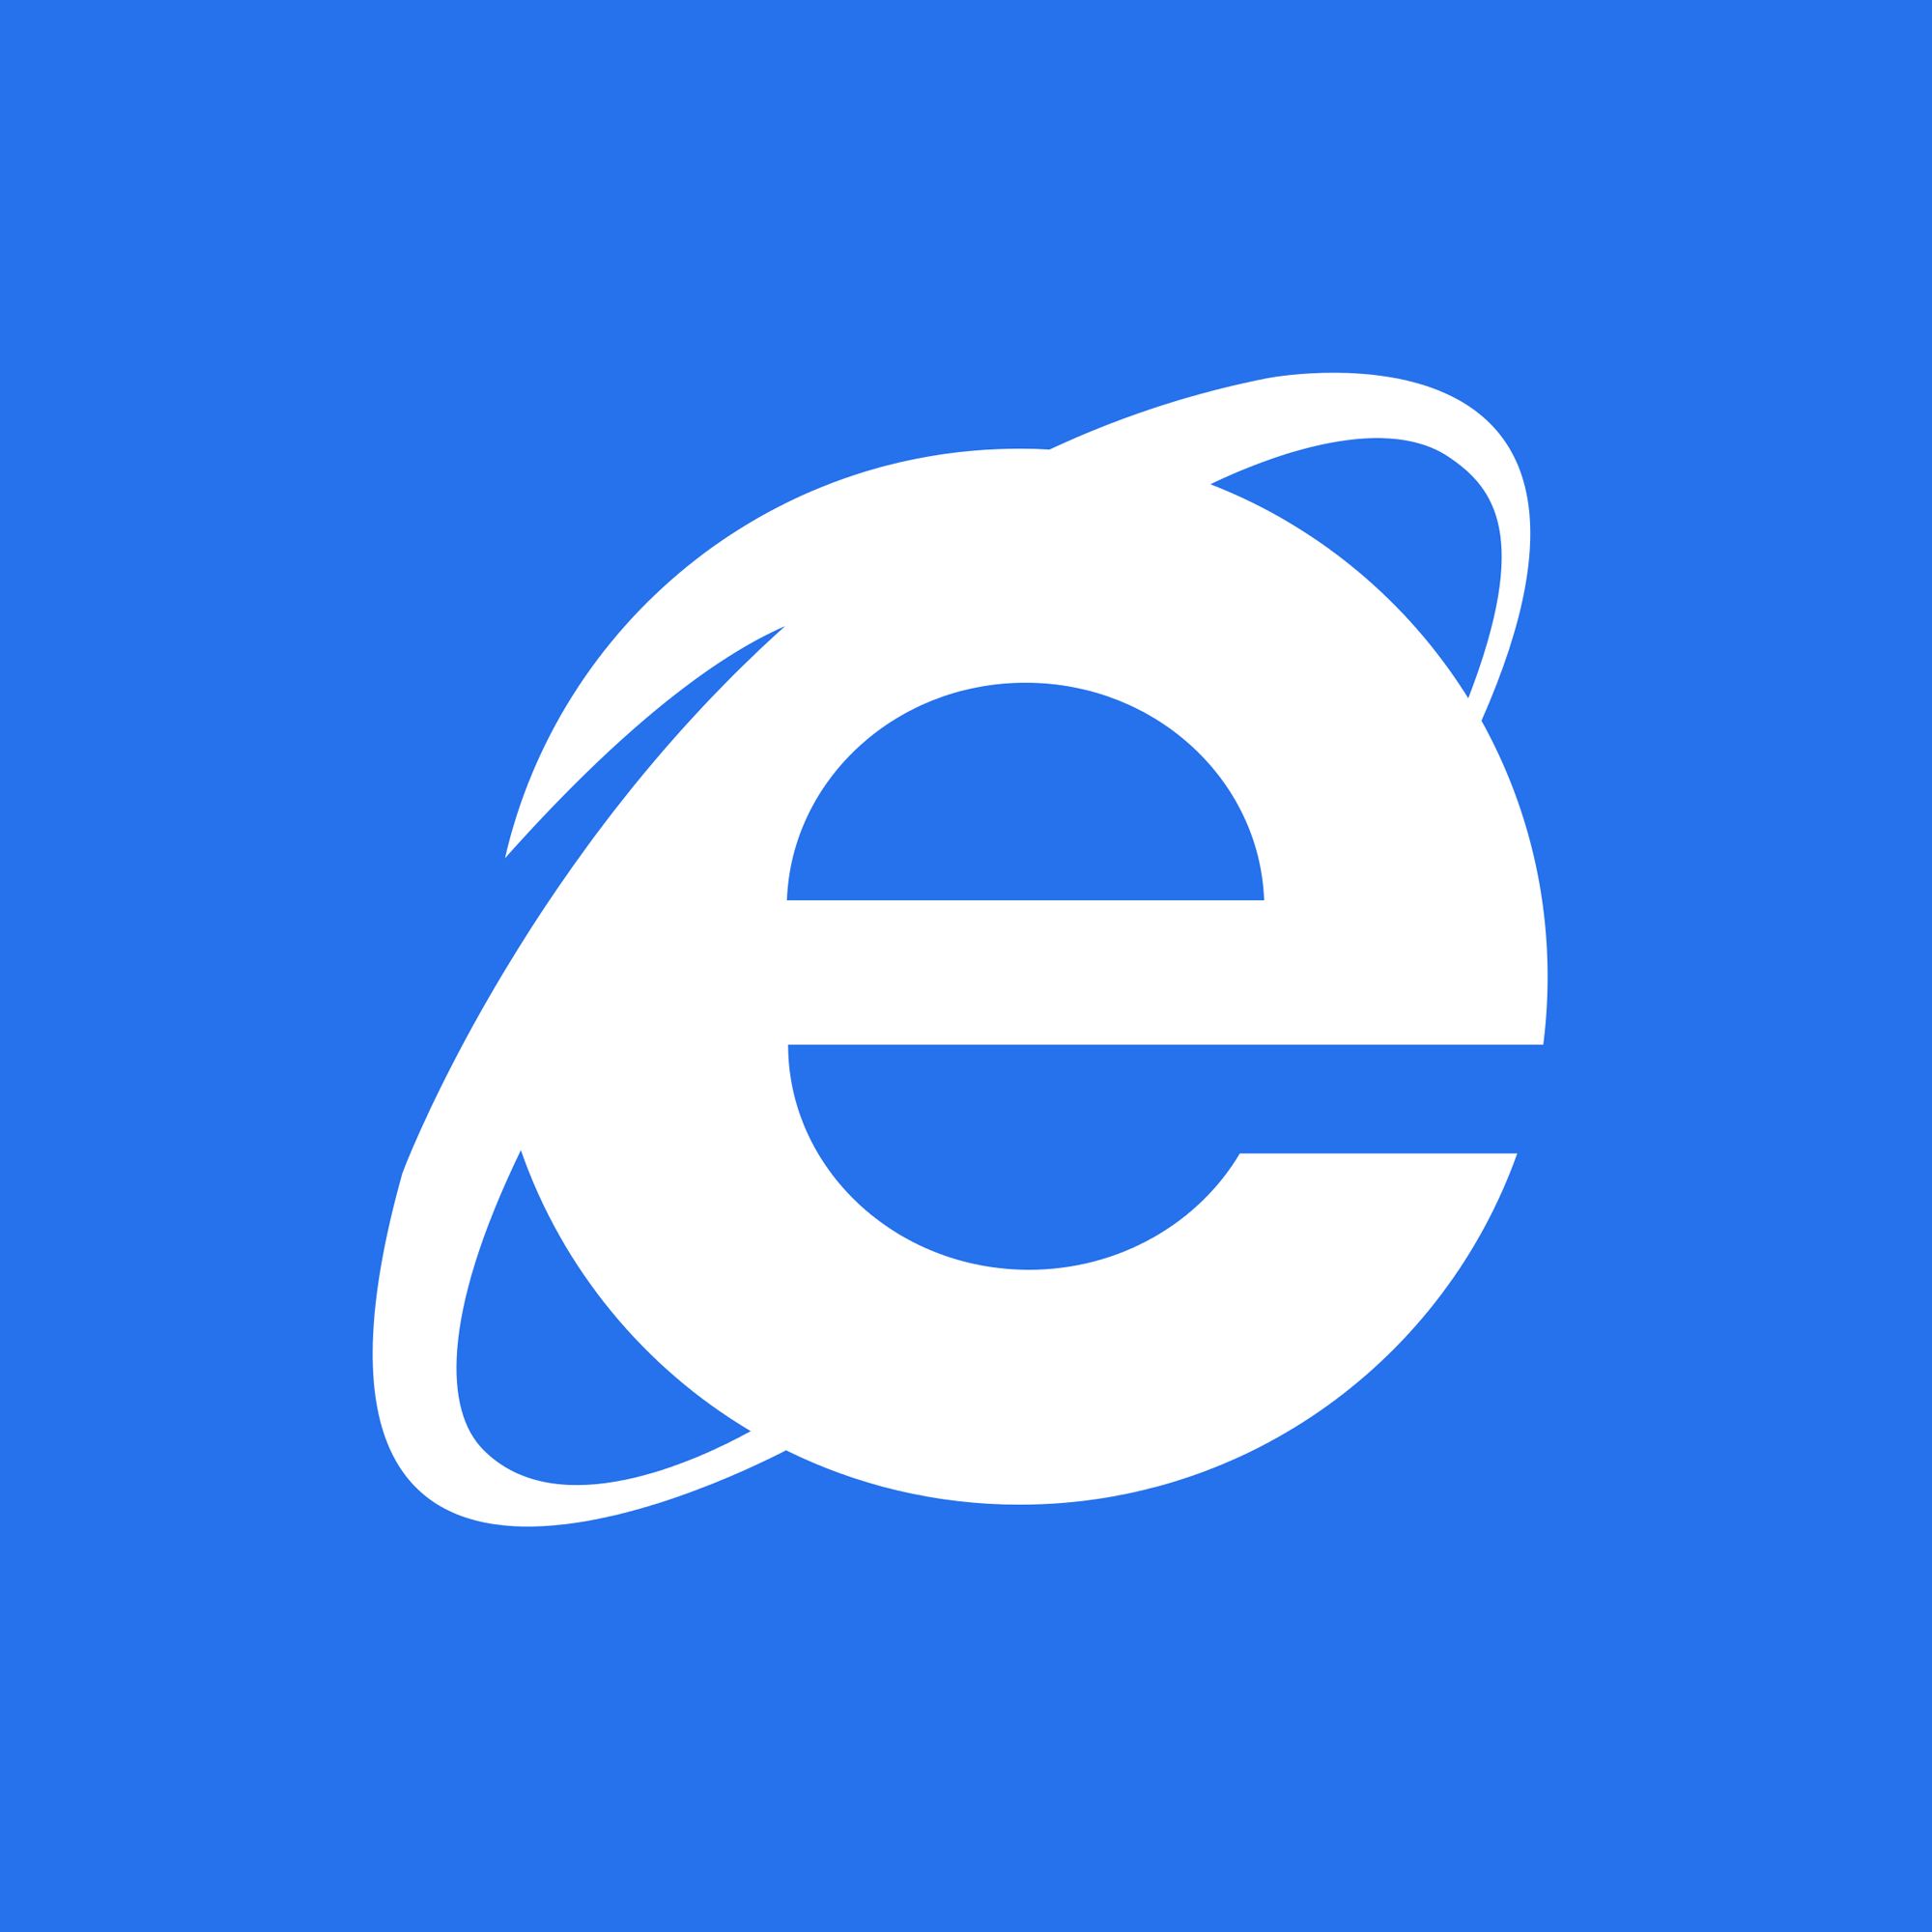 Microsoft Edge Icon At Vectorified Com Collection Of Microsoft Edge Icon Free For Personal Use